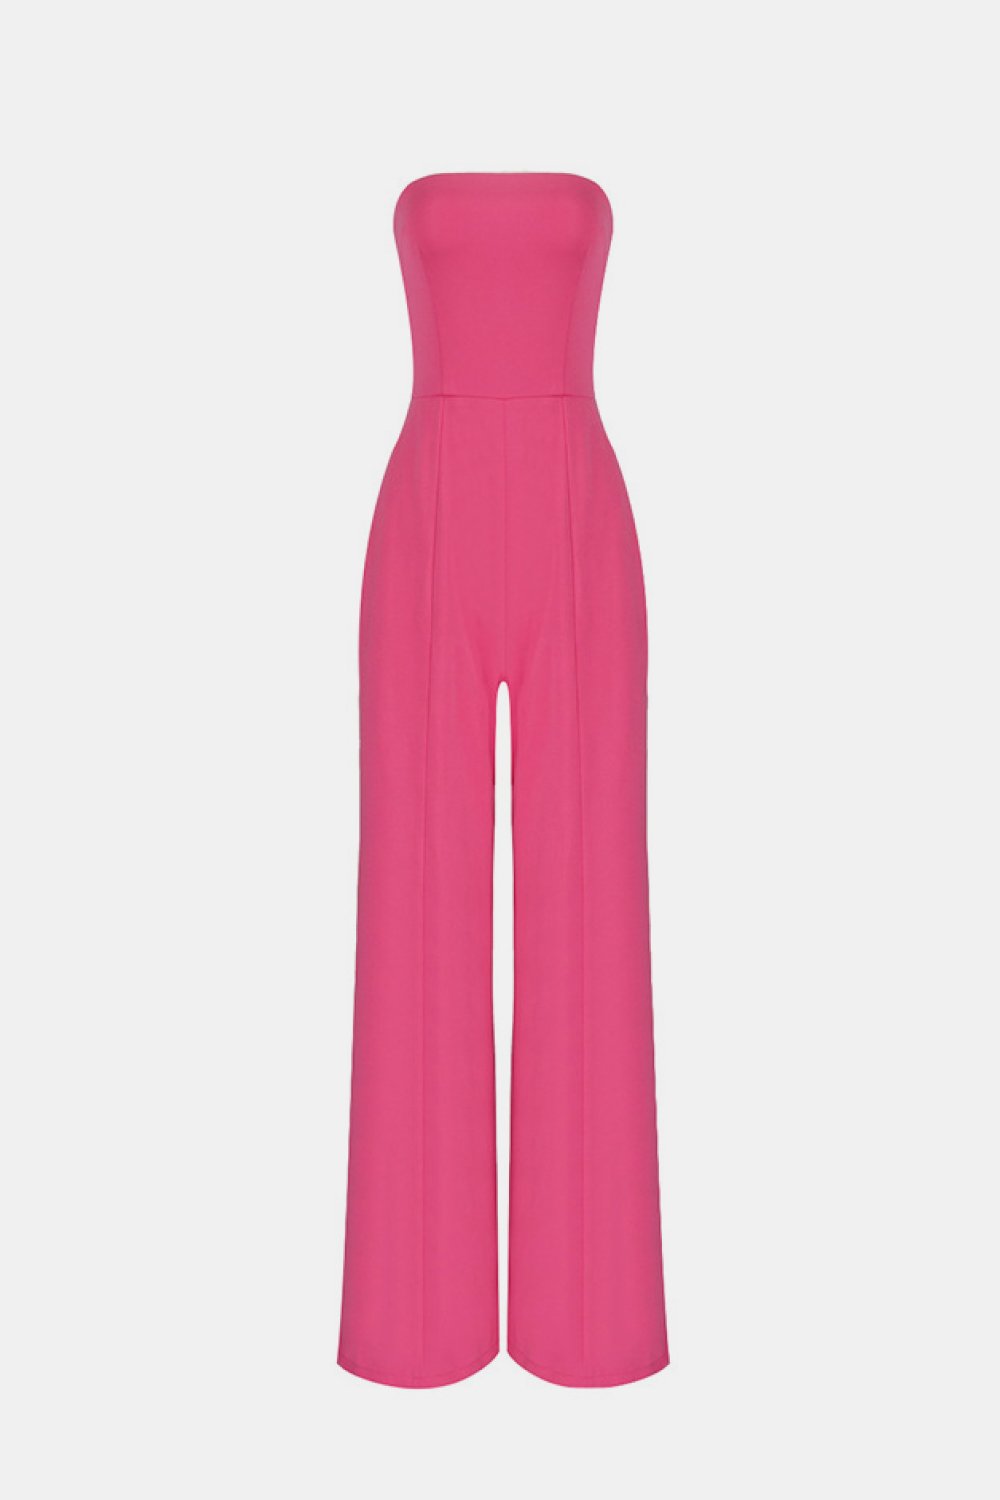 No matter the occasion, the All Inclusive Strapless Jumpsuit is sure to impress!  Featuring ahugging figure with an invisible zip closure at back, princess-seamed bodice with an elasticized back, strapless and welt pockets detailing. This endless strapless jumpsuit in classic solid color is perfect from day to night. Complete it with a mini clutch and heels for a sophisticated look. 